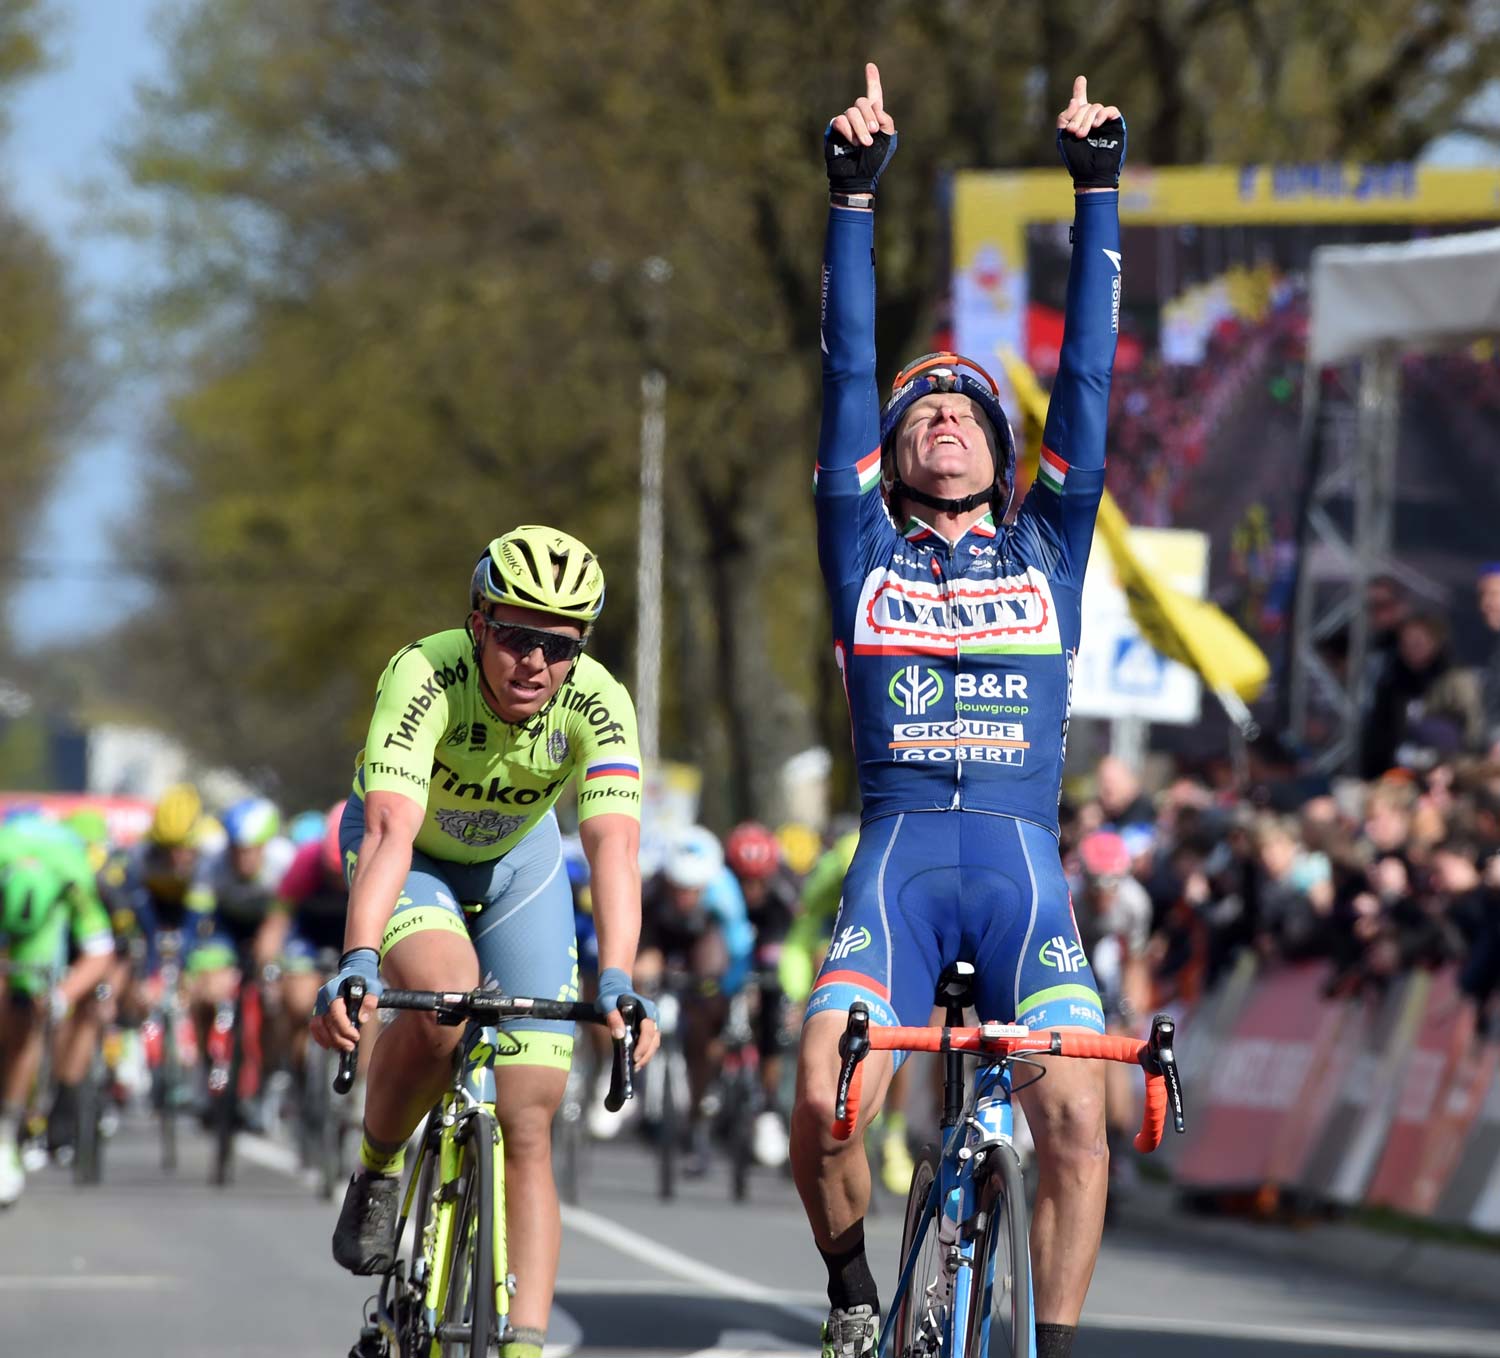 Enrico Gasparotto delivers the win that Wanty-Groupe Gobert so desperately needed. This was one for Antoine! Photo: Graham Watson